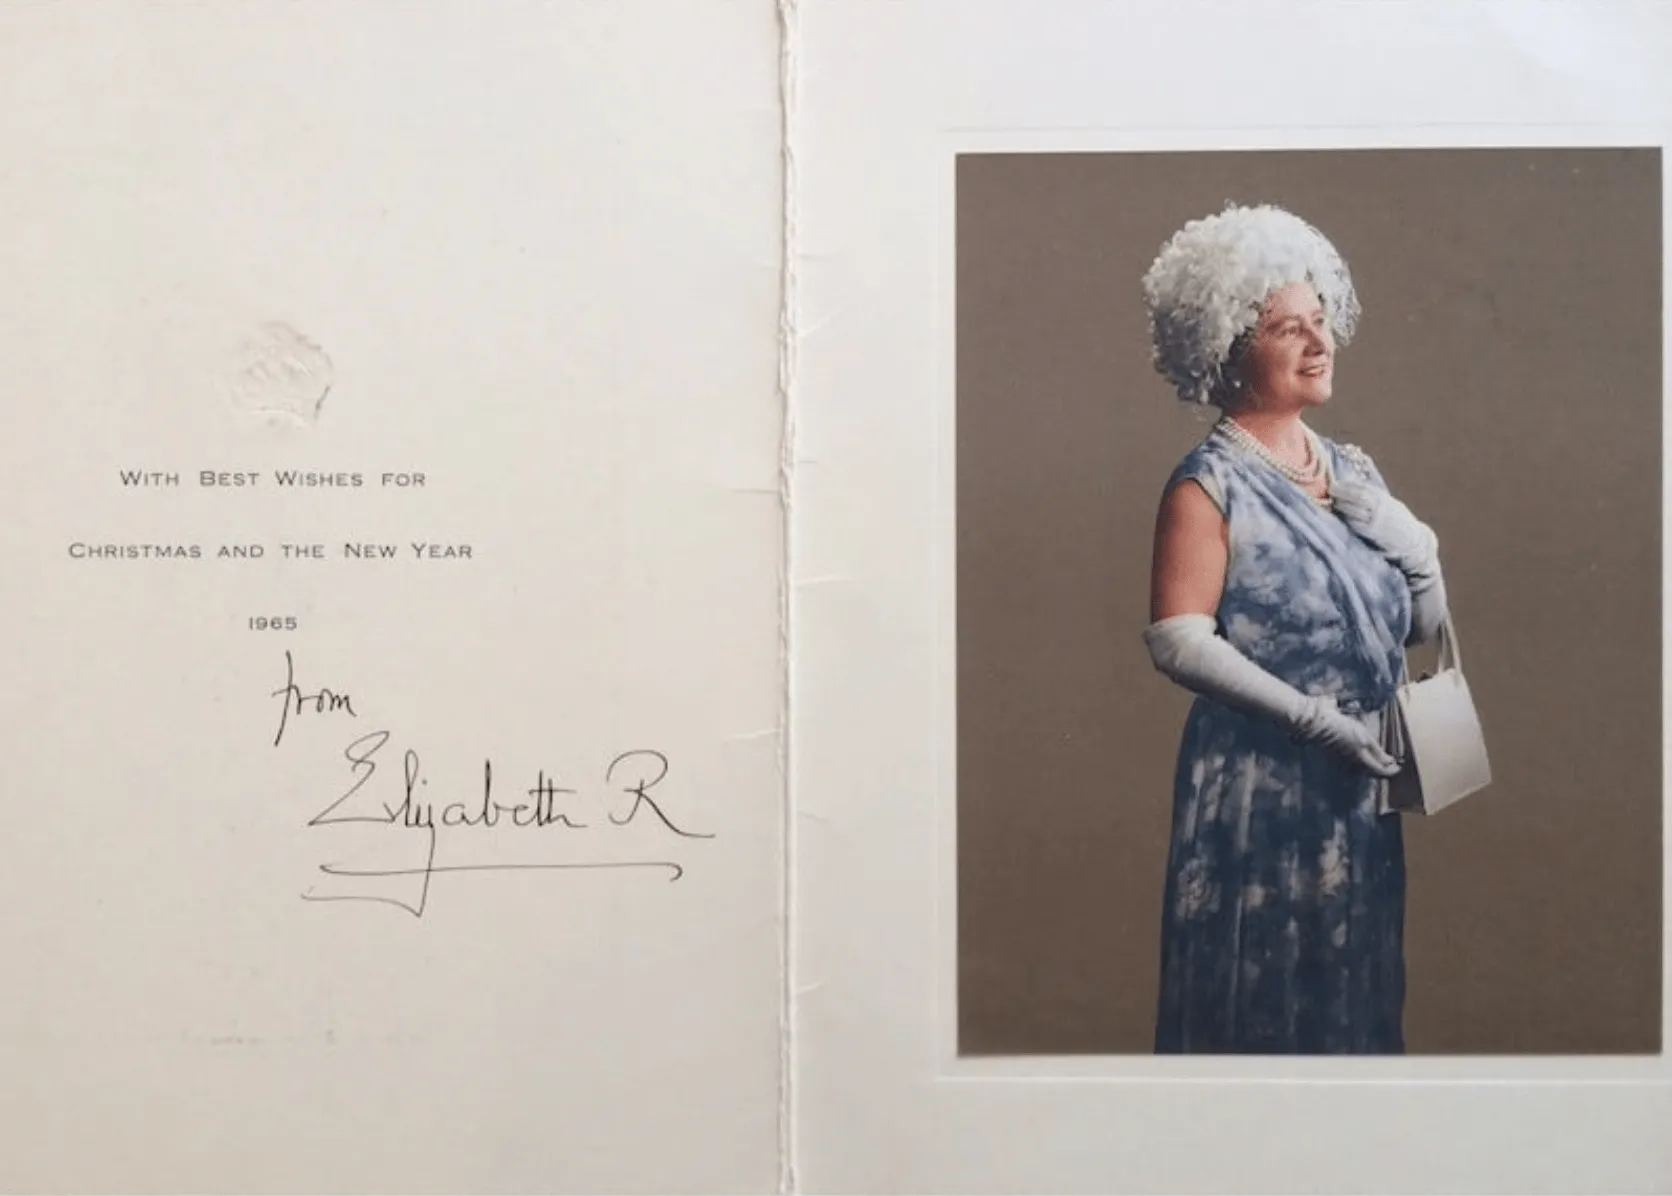 Signed Christmas card from the Queen mother